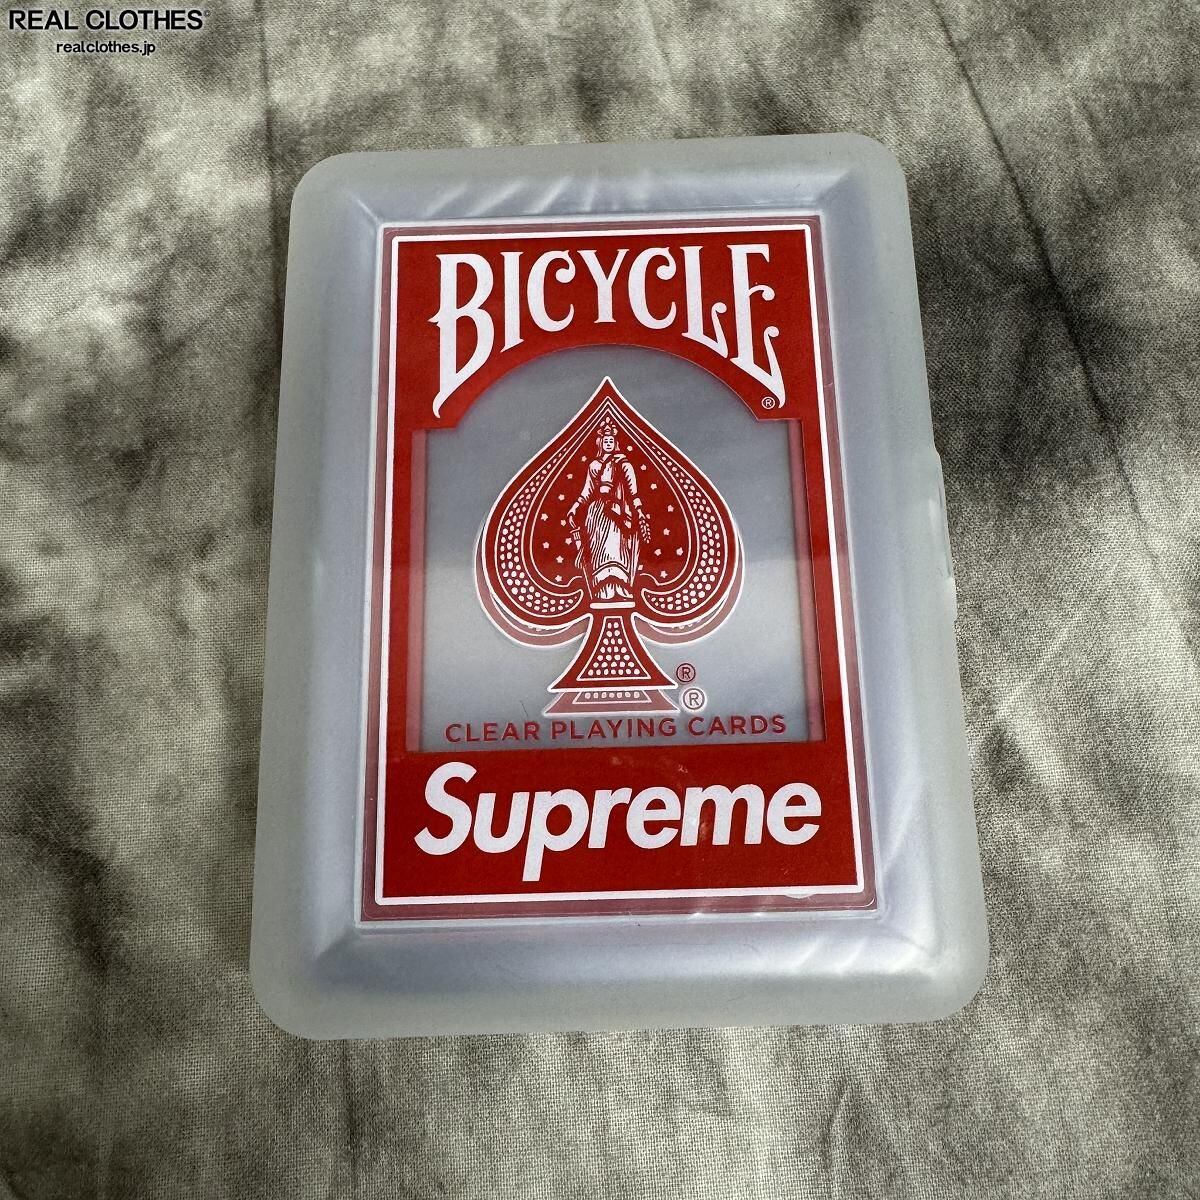 20AW supreme Bicycle Clear Playing Cards